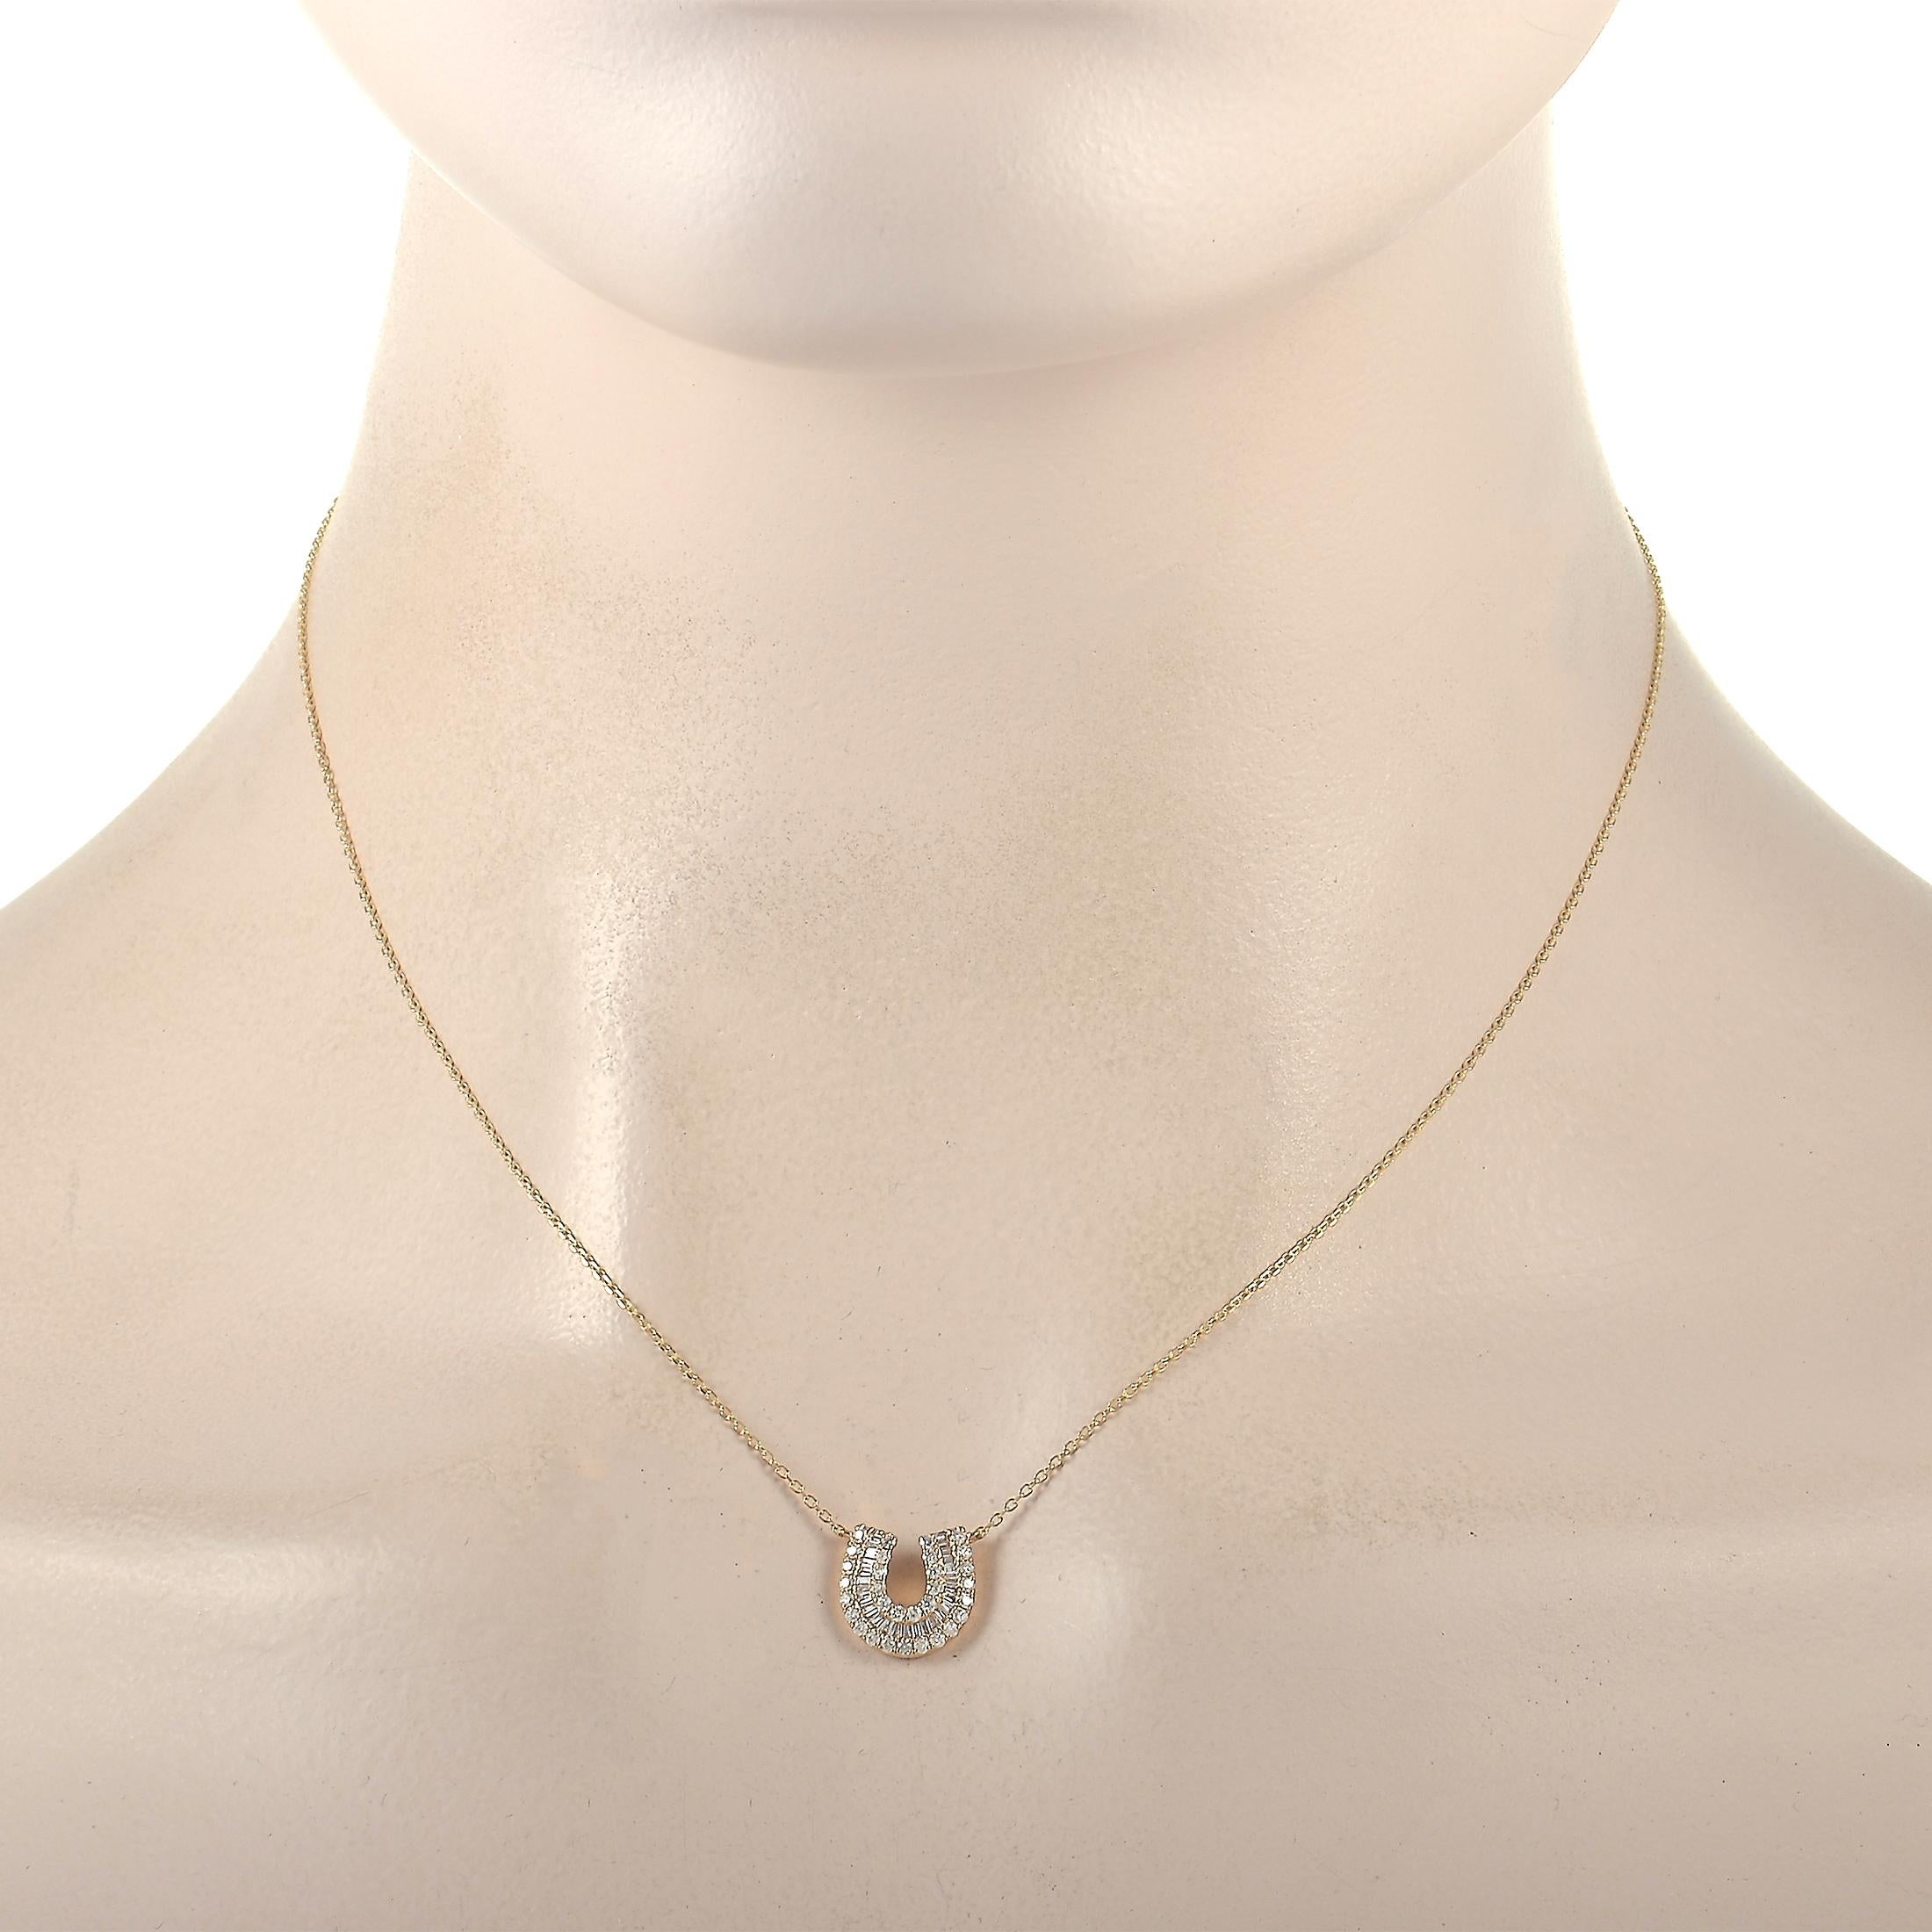 This elegant LB Exclusive 14K Yellow Gold 0.45 ct Diamond Horseshoe Necklace is made with a delicate 14K yellow gold chain, highlighting a horseshoe pendant. The pendant is set with two rows of round diamonds flanking and a row of baguette diamonds